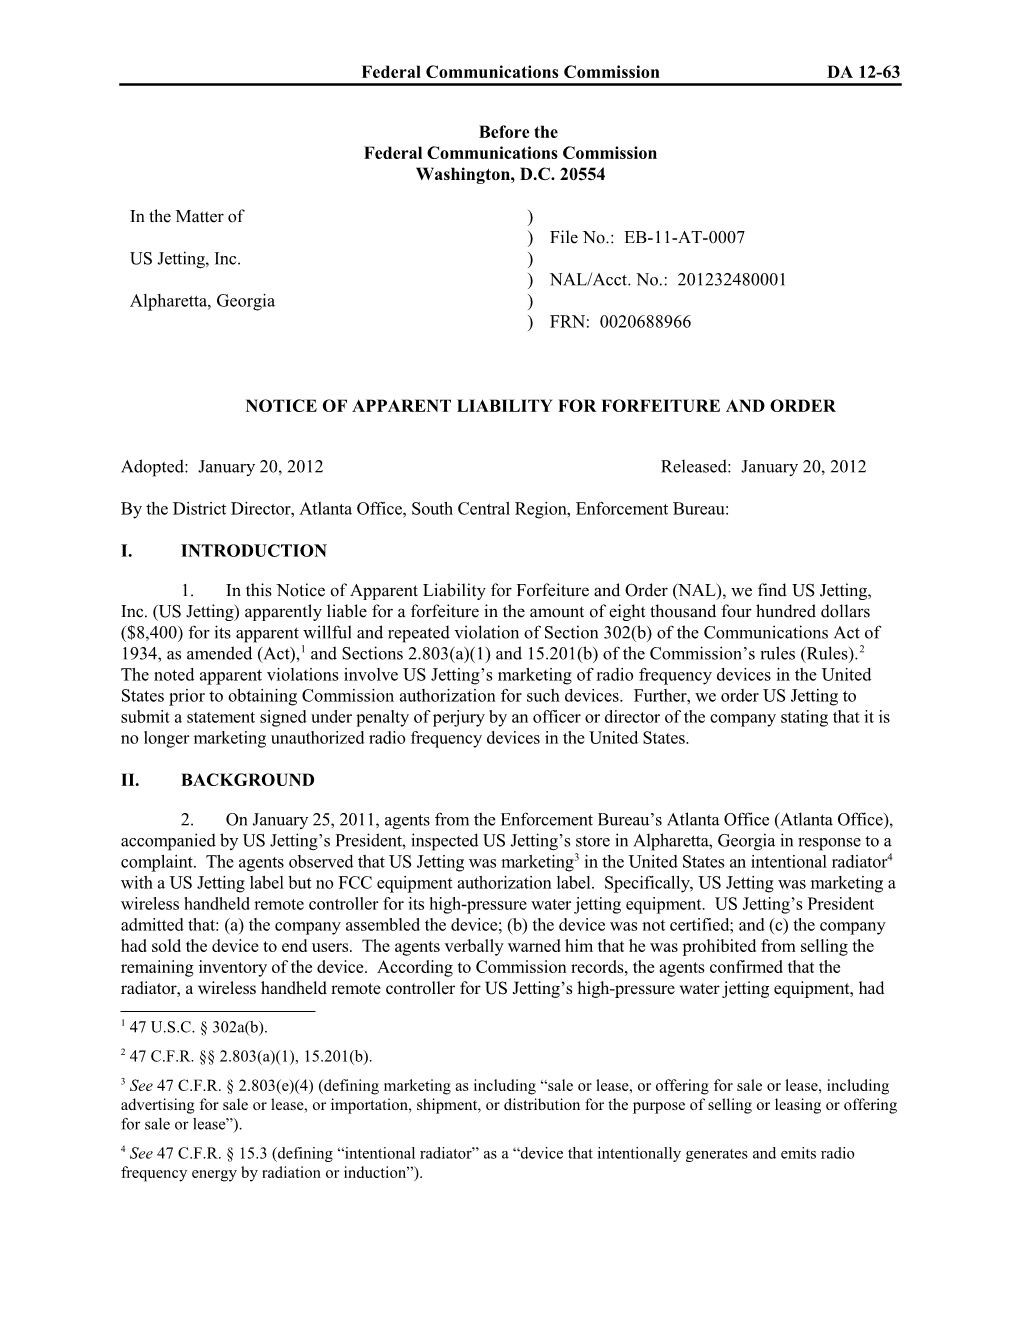 Notice of Apparent Liability for Forfeiture and Order s3